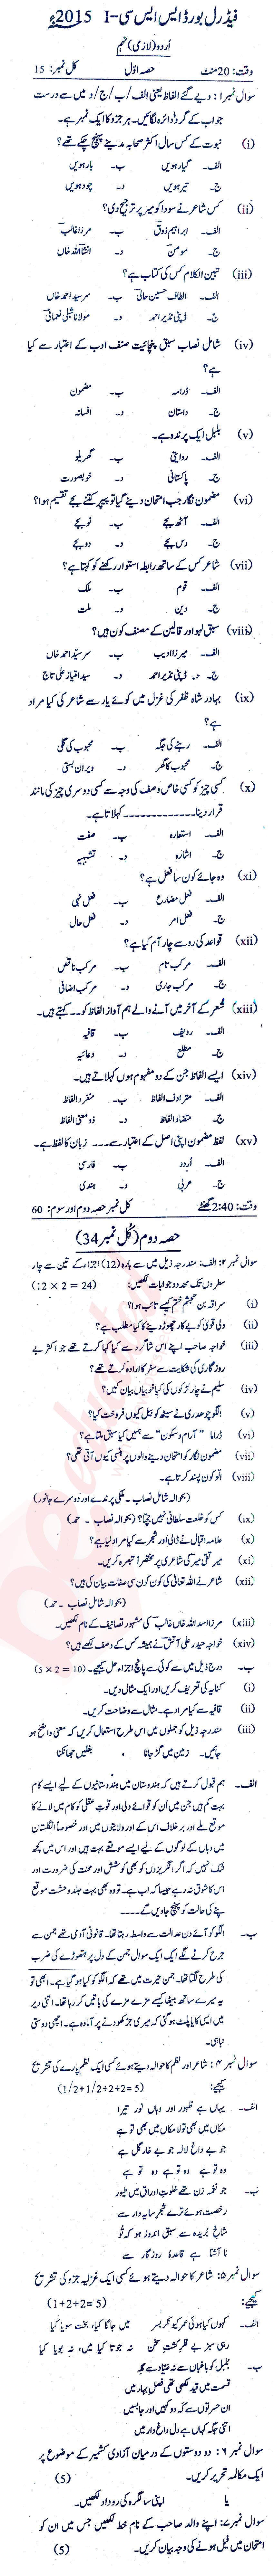 Urdu 9th class Past Paper Group 1 Federal BISE  2015